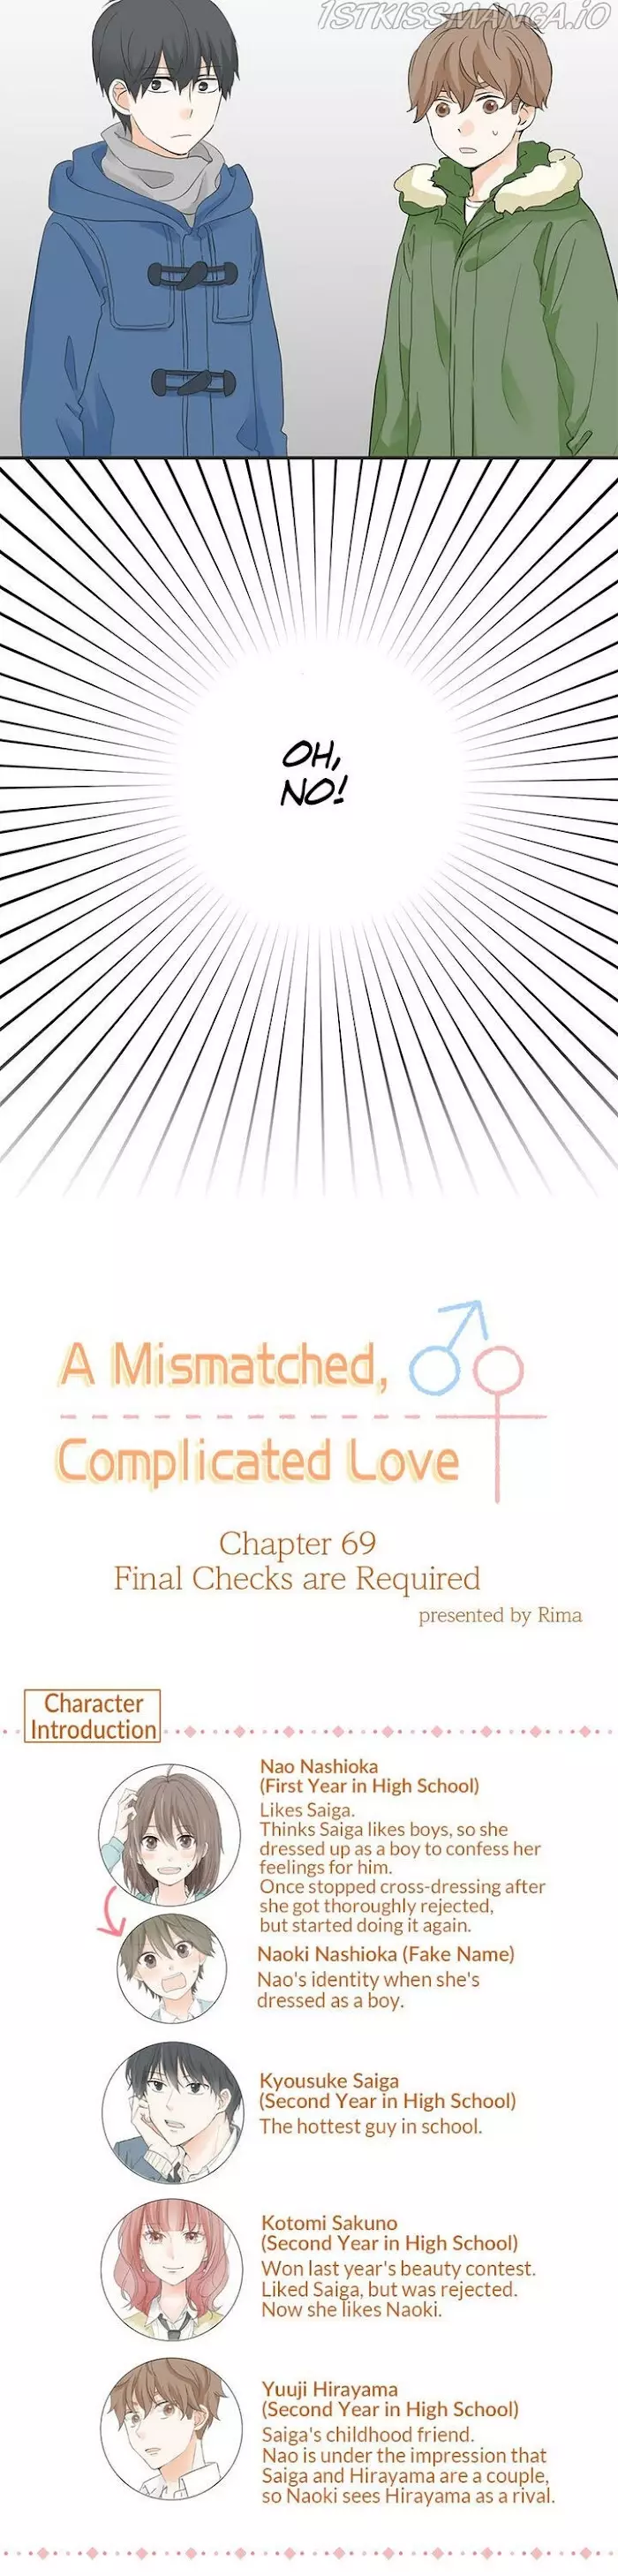 Mismatched Love - 69 page 2-4f98eff0